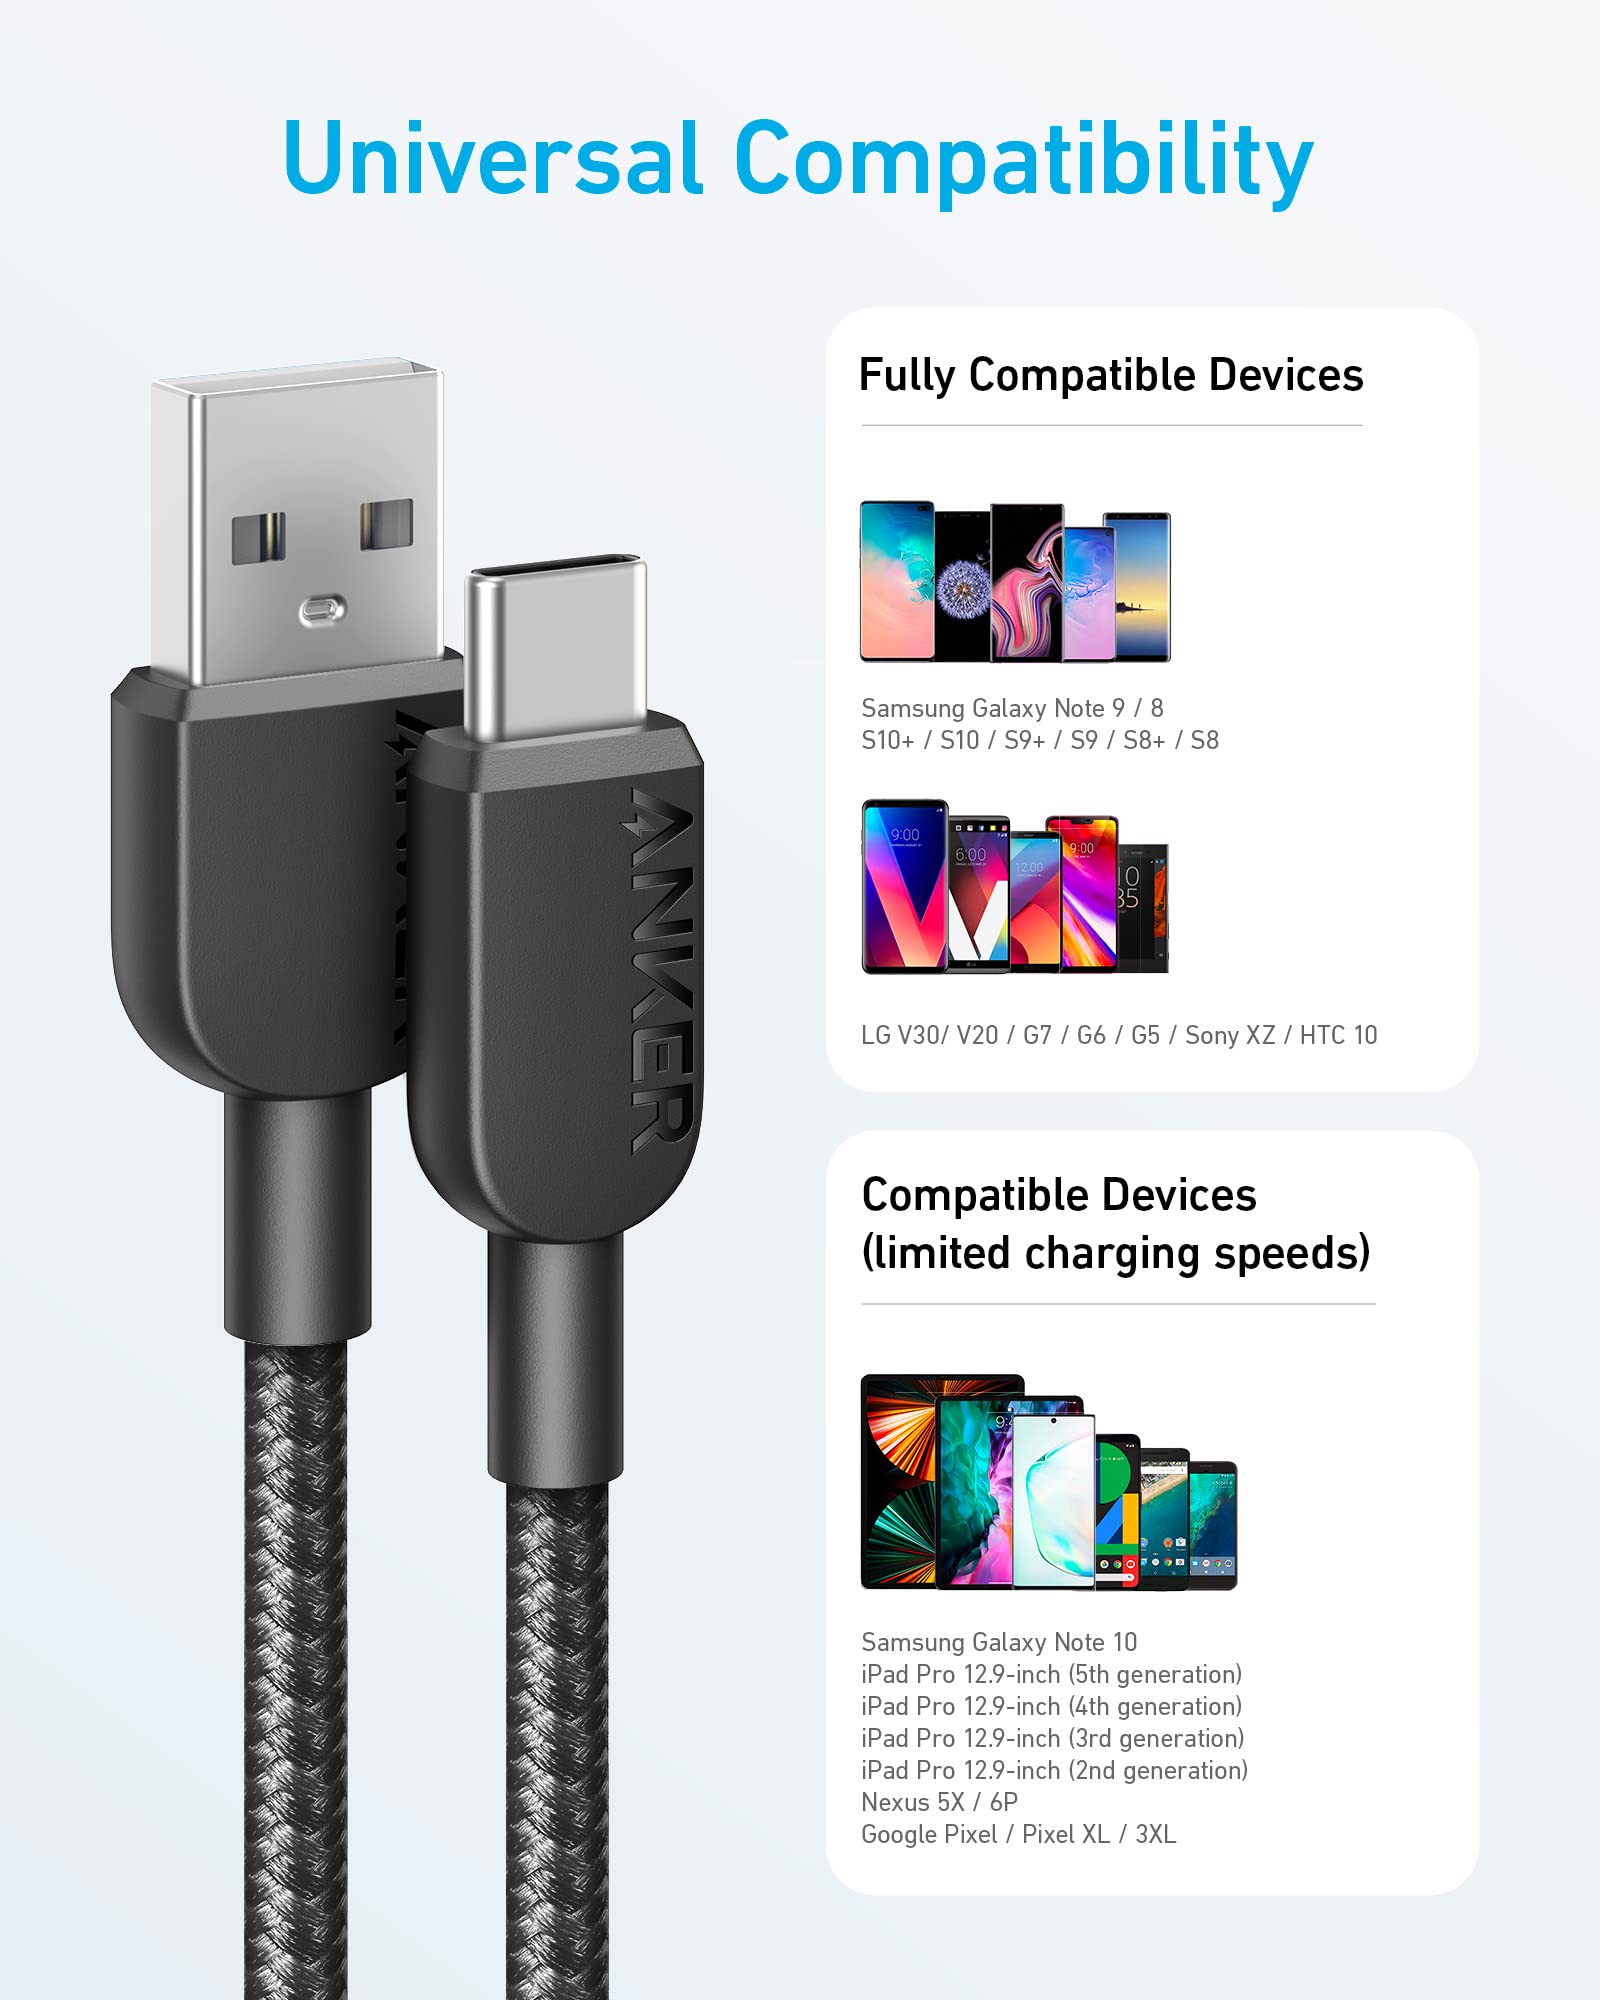 Anker USB C Cable, [2 Pack, 10ft] 310 USB A to USB C Charger Cable, USB 2.0 Nylon Charging Cord Fast Charging for Samsung Galaxy Note 10 Note 9/S10+ S10, LG V30 (Black)